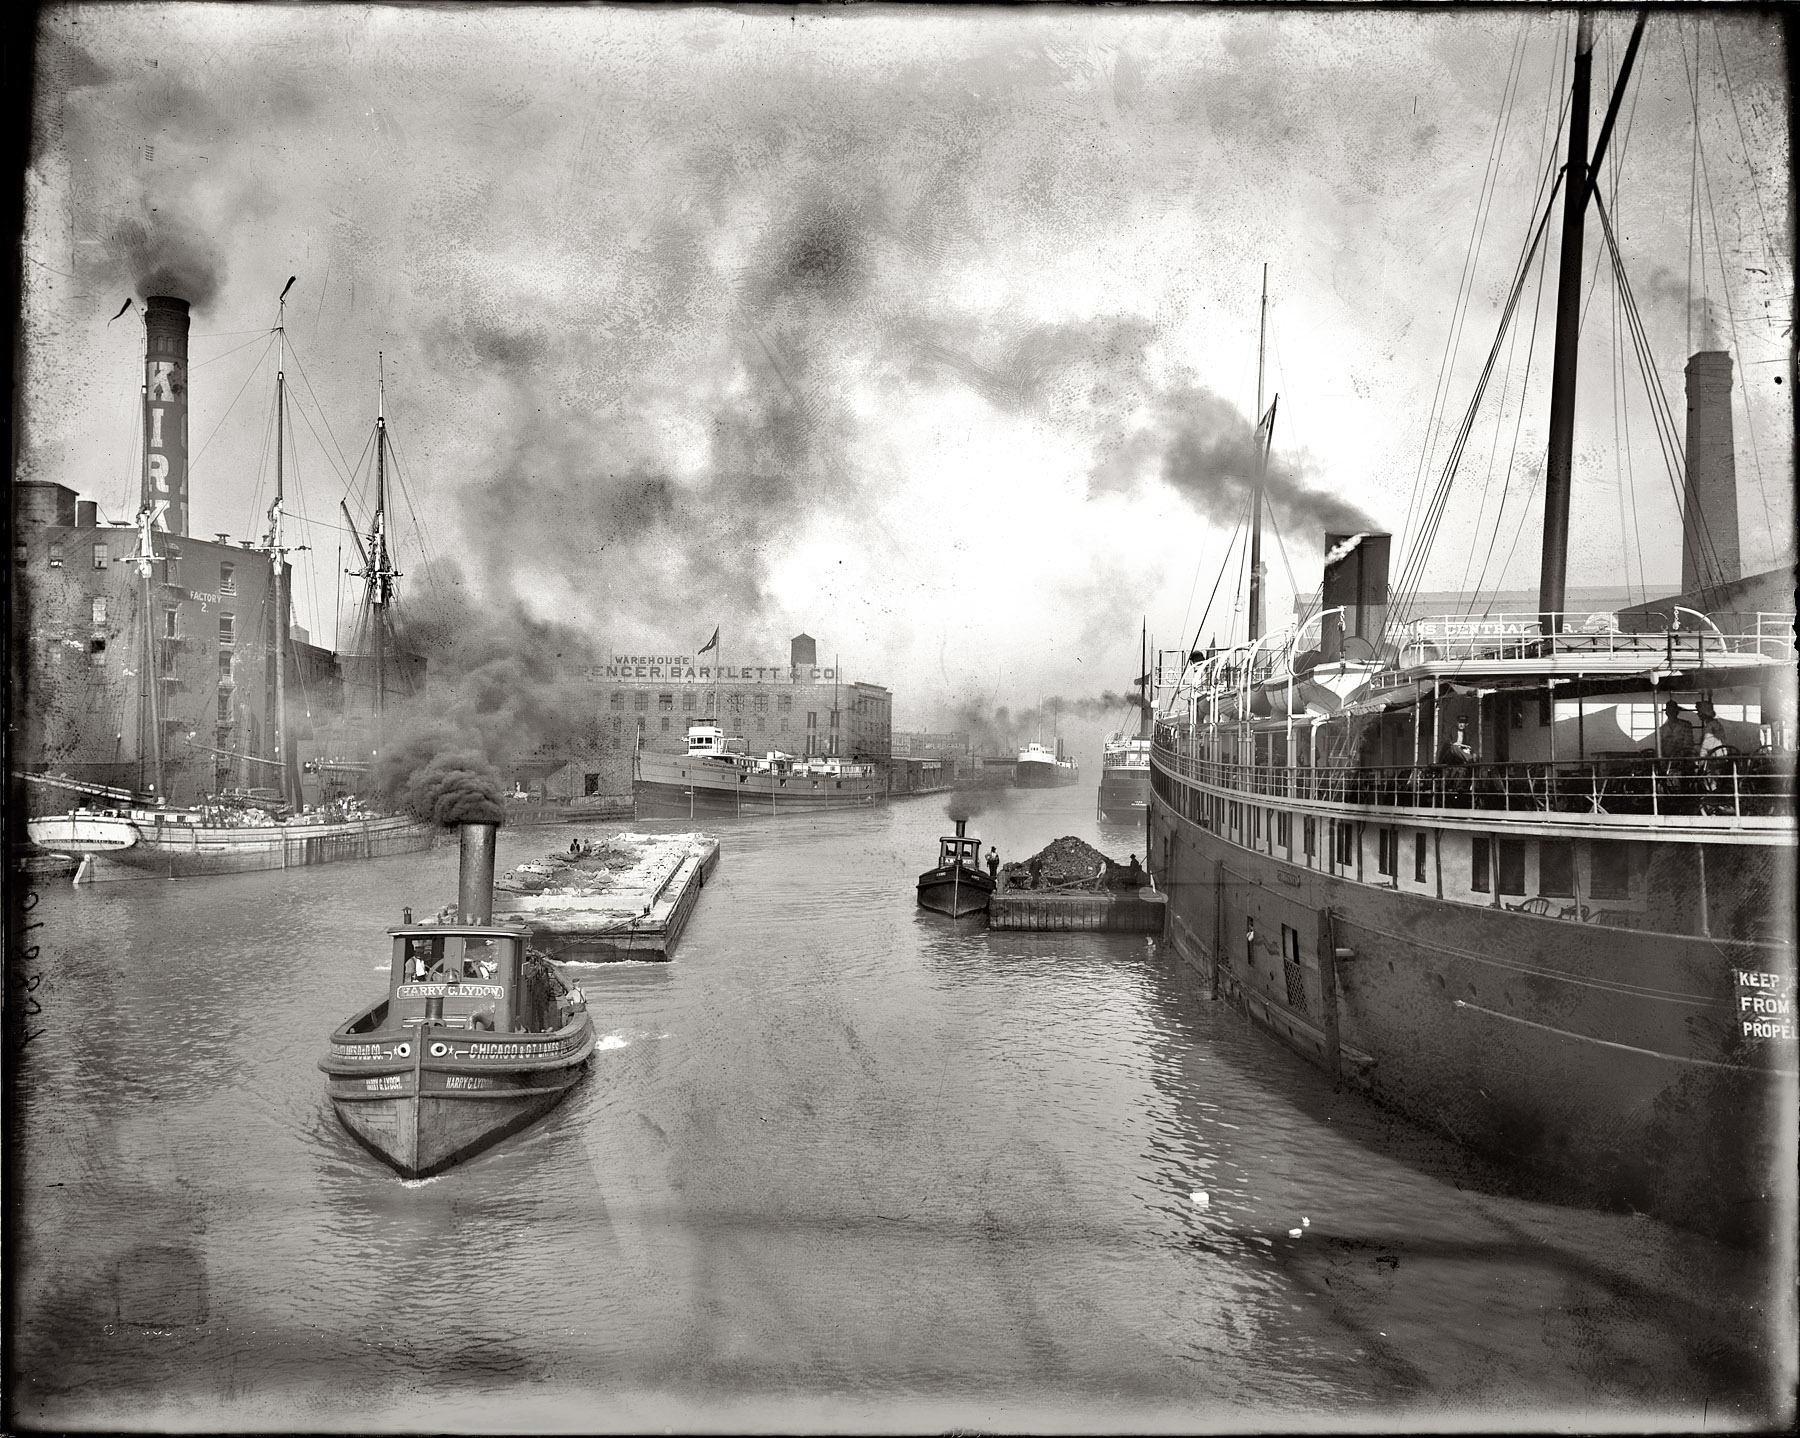 Chicago, 1905. "Chicago River east from Rush Street Bridge." Detroit Publishing Company glass negative, Library of Congress. View full size.